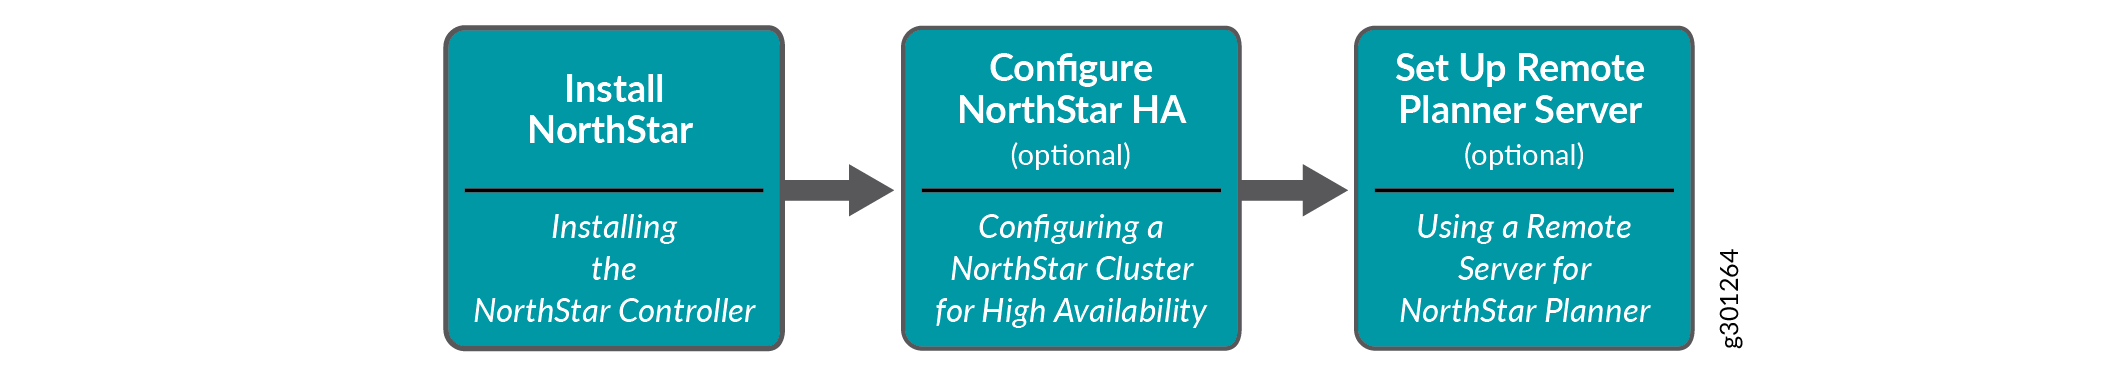 High Level Process
Flow for Installing NorthStar